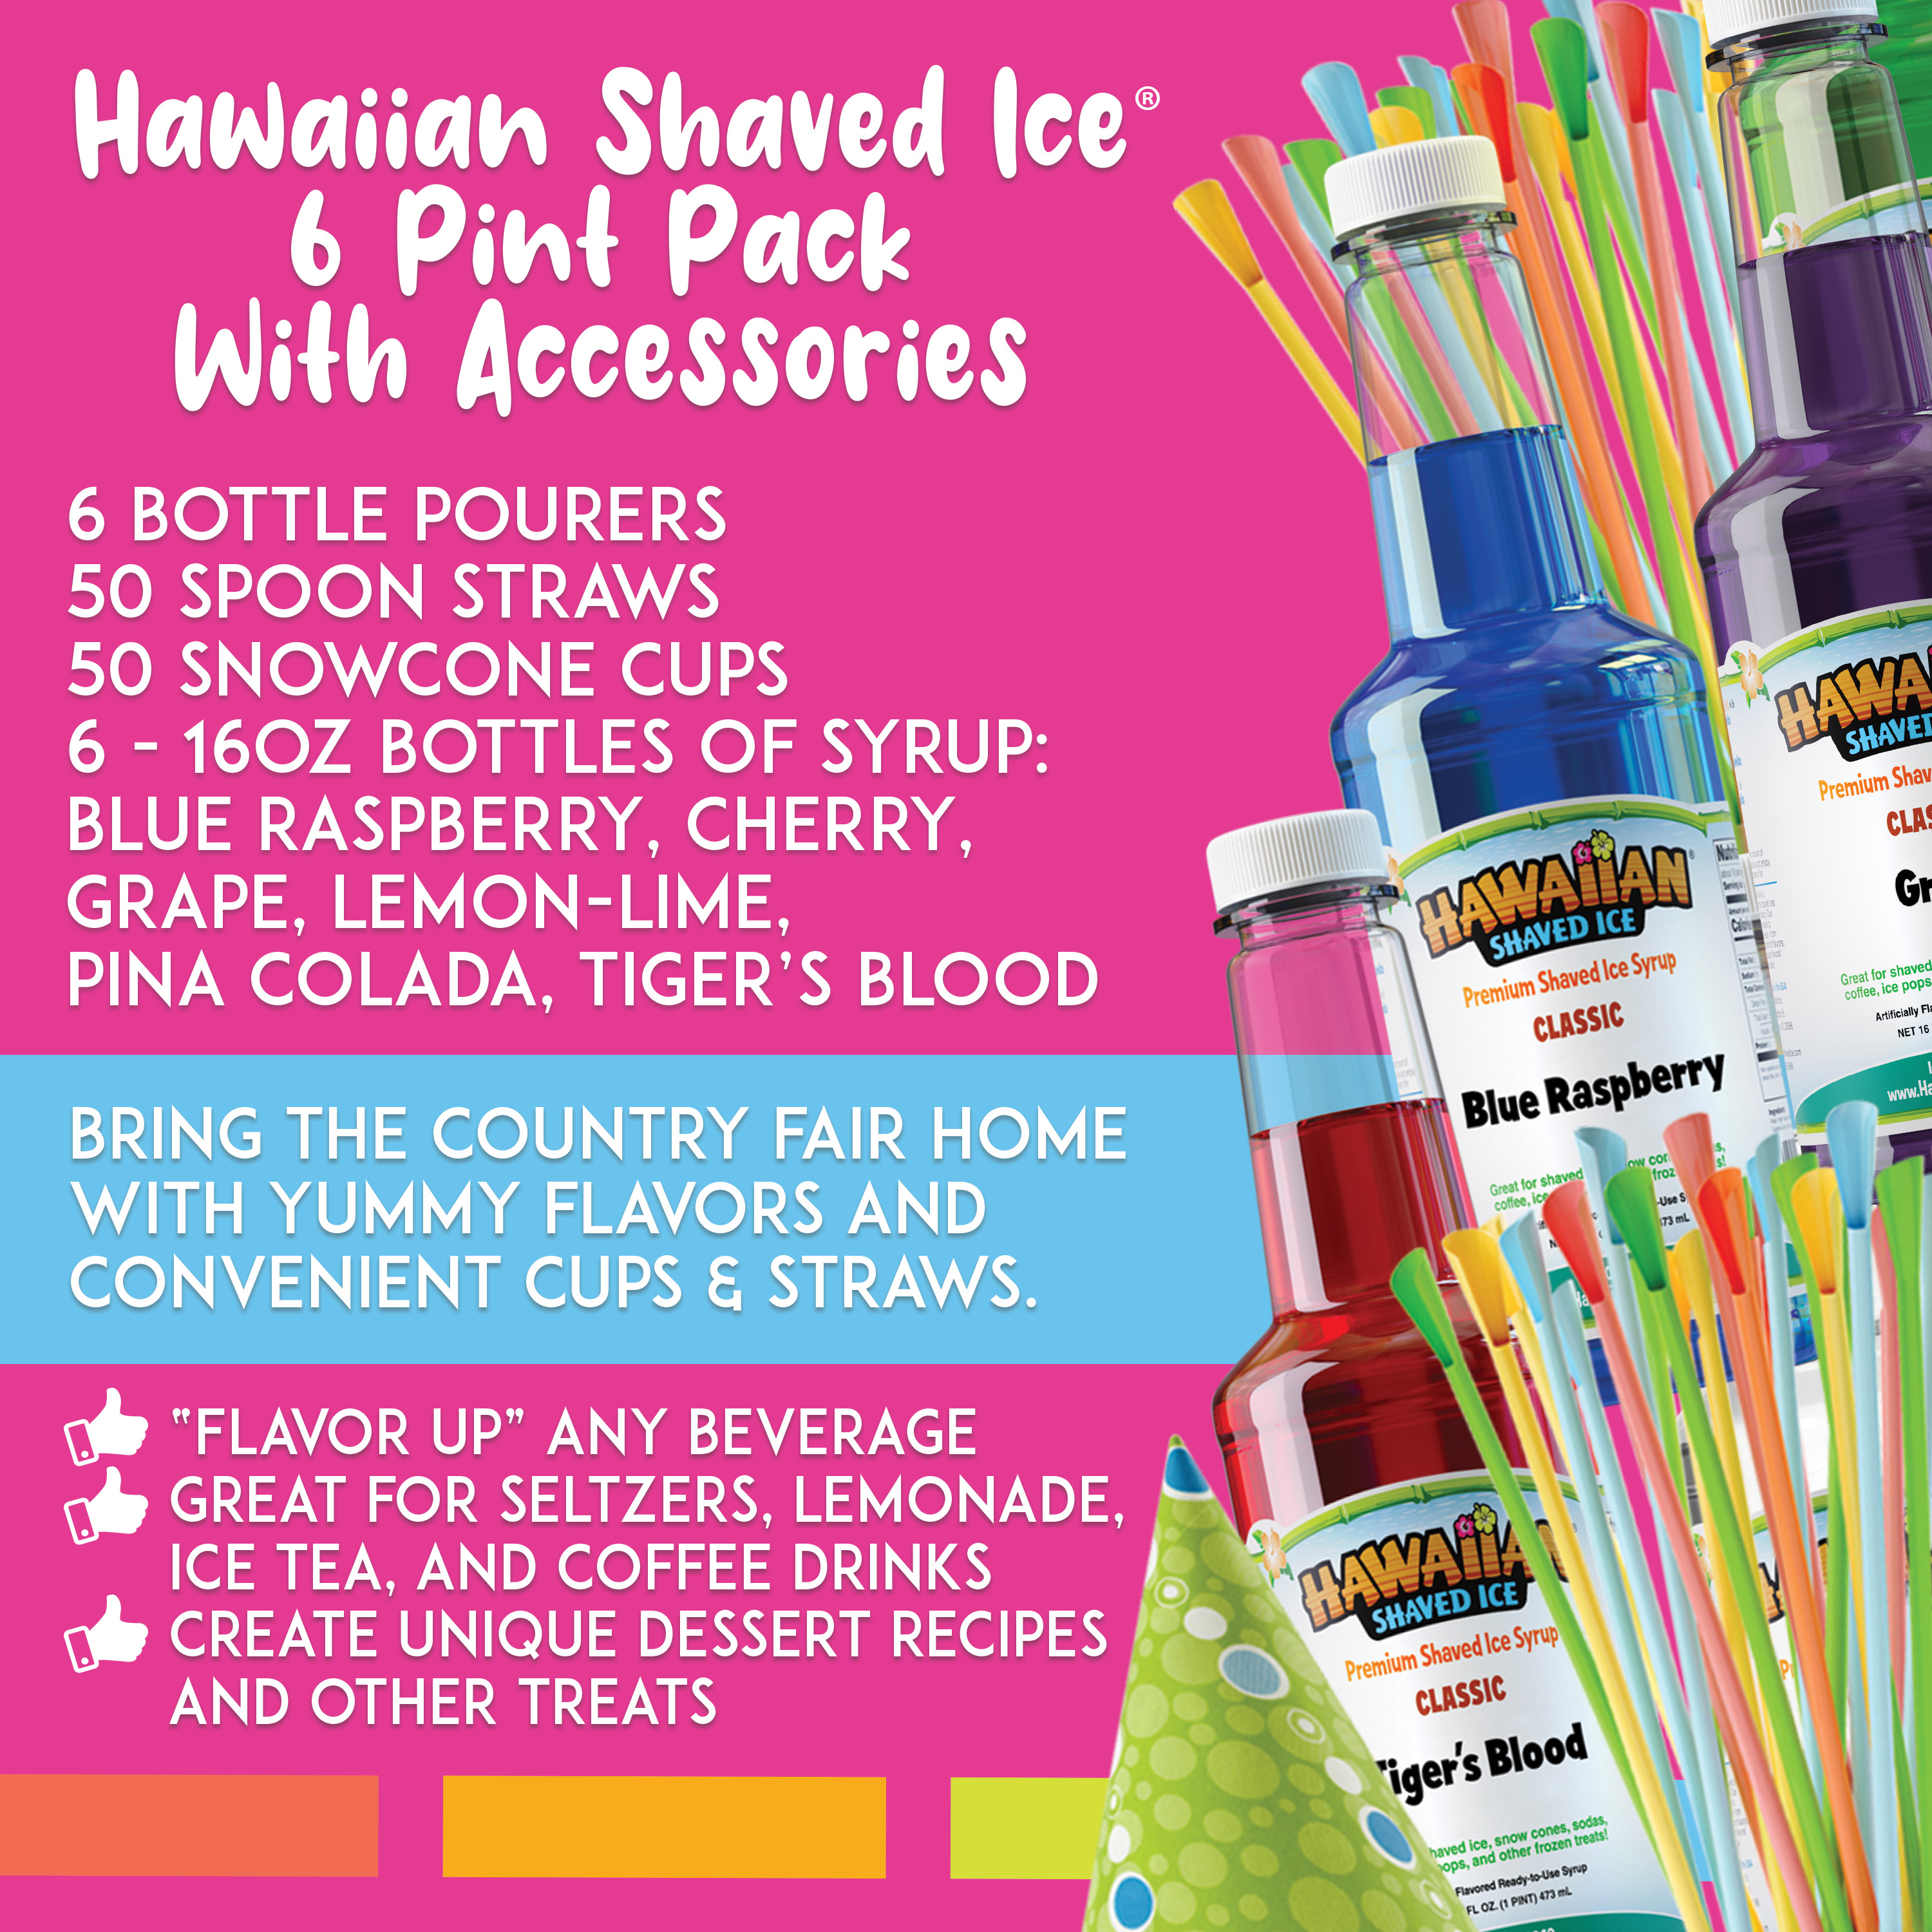 Hawaiian Shaved Ice Snow Cone Syrup Flavor Fun Pack with Accessories  (Pints)